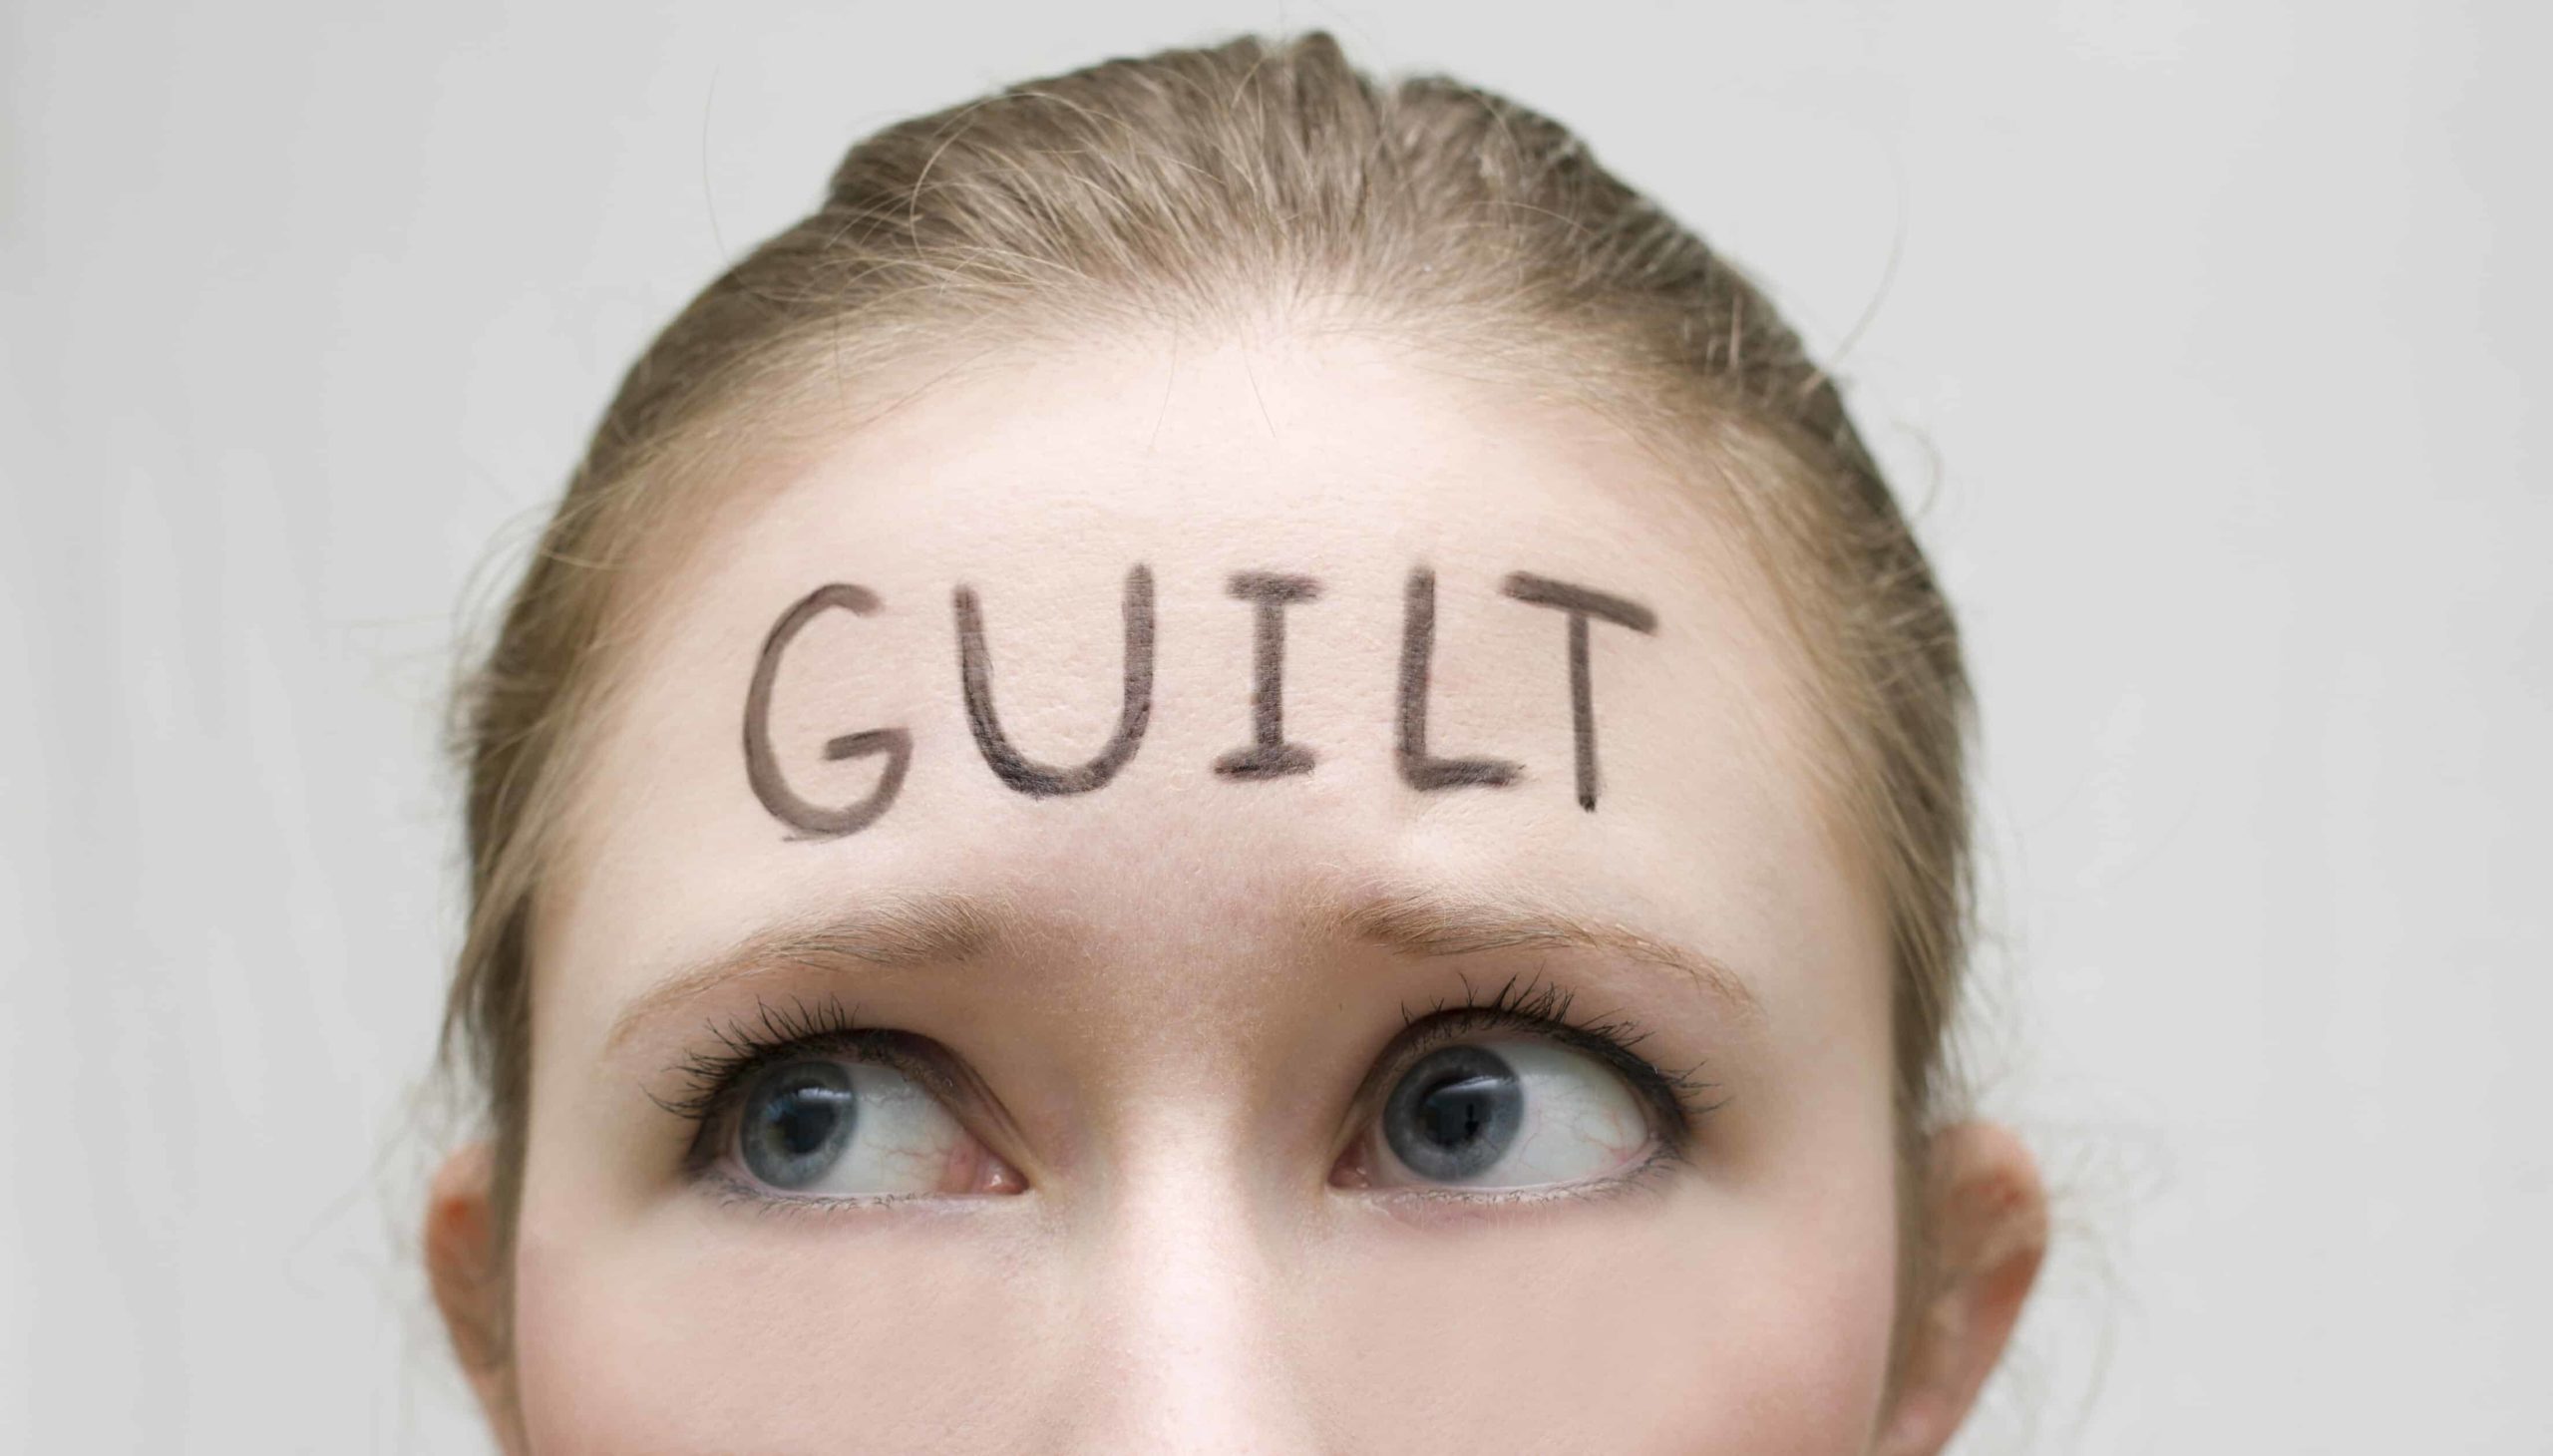 Close up of a nervous woman with the word "Guilt" written on her forehead.